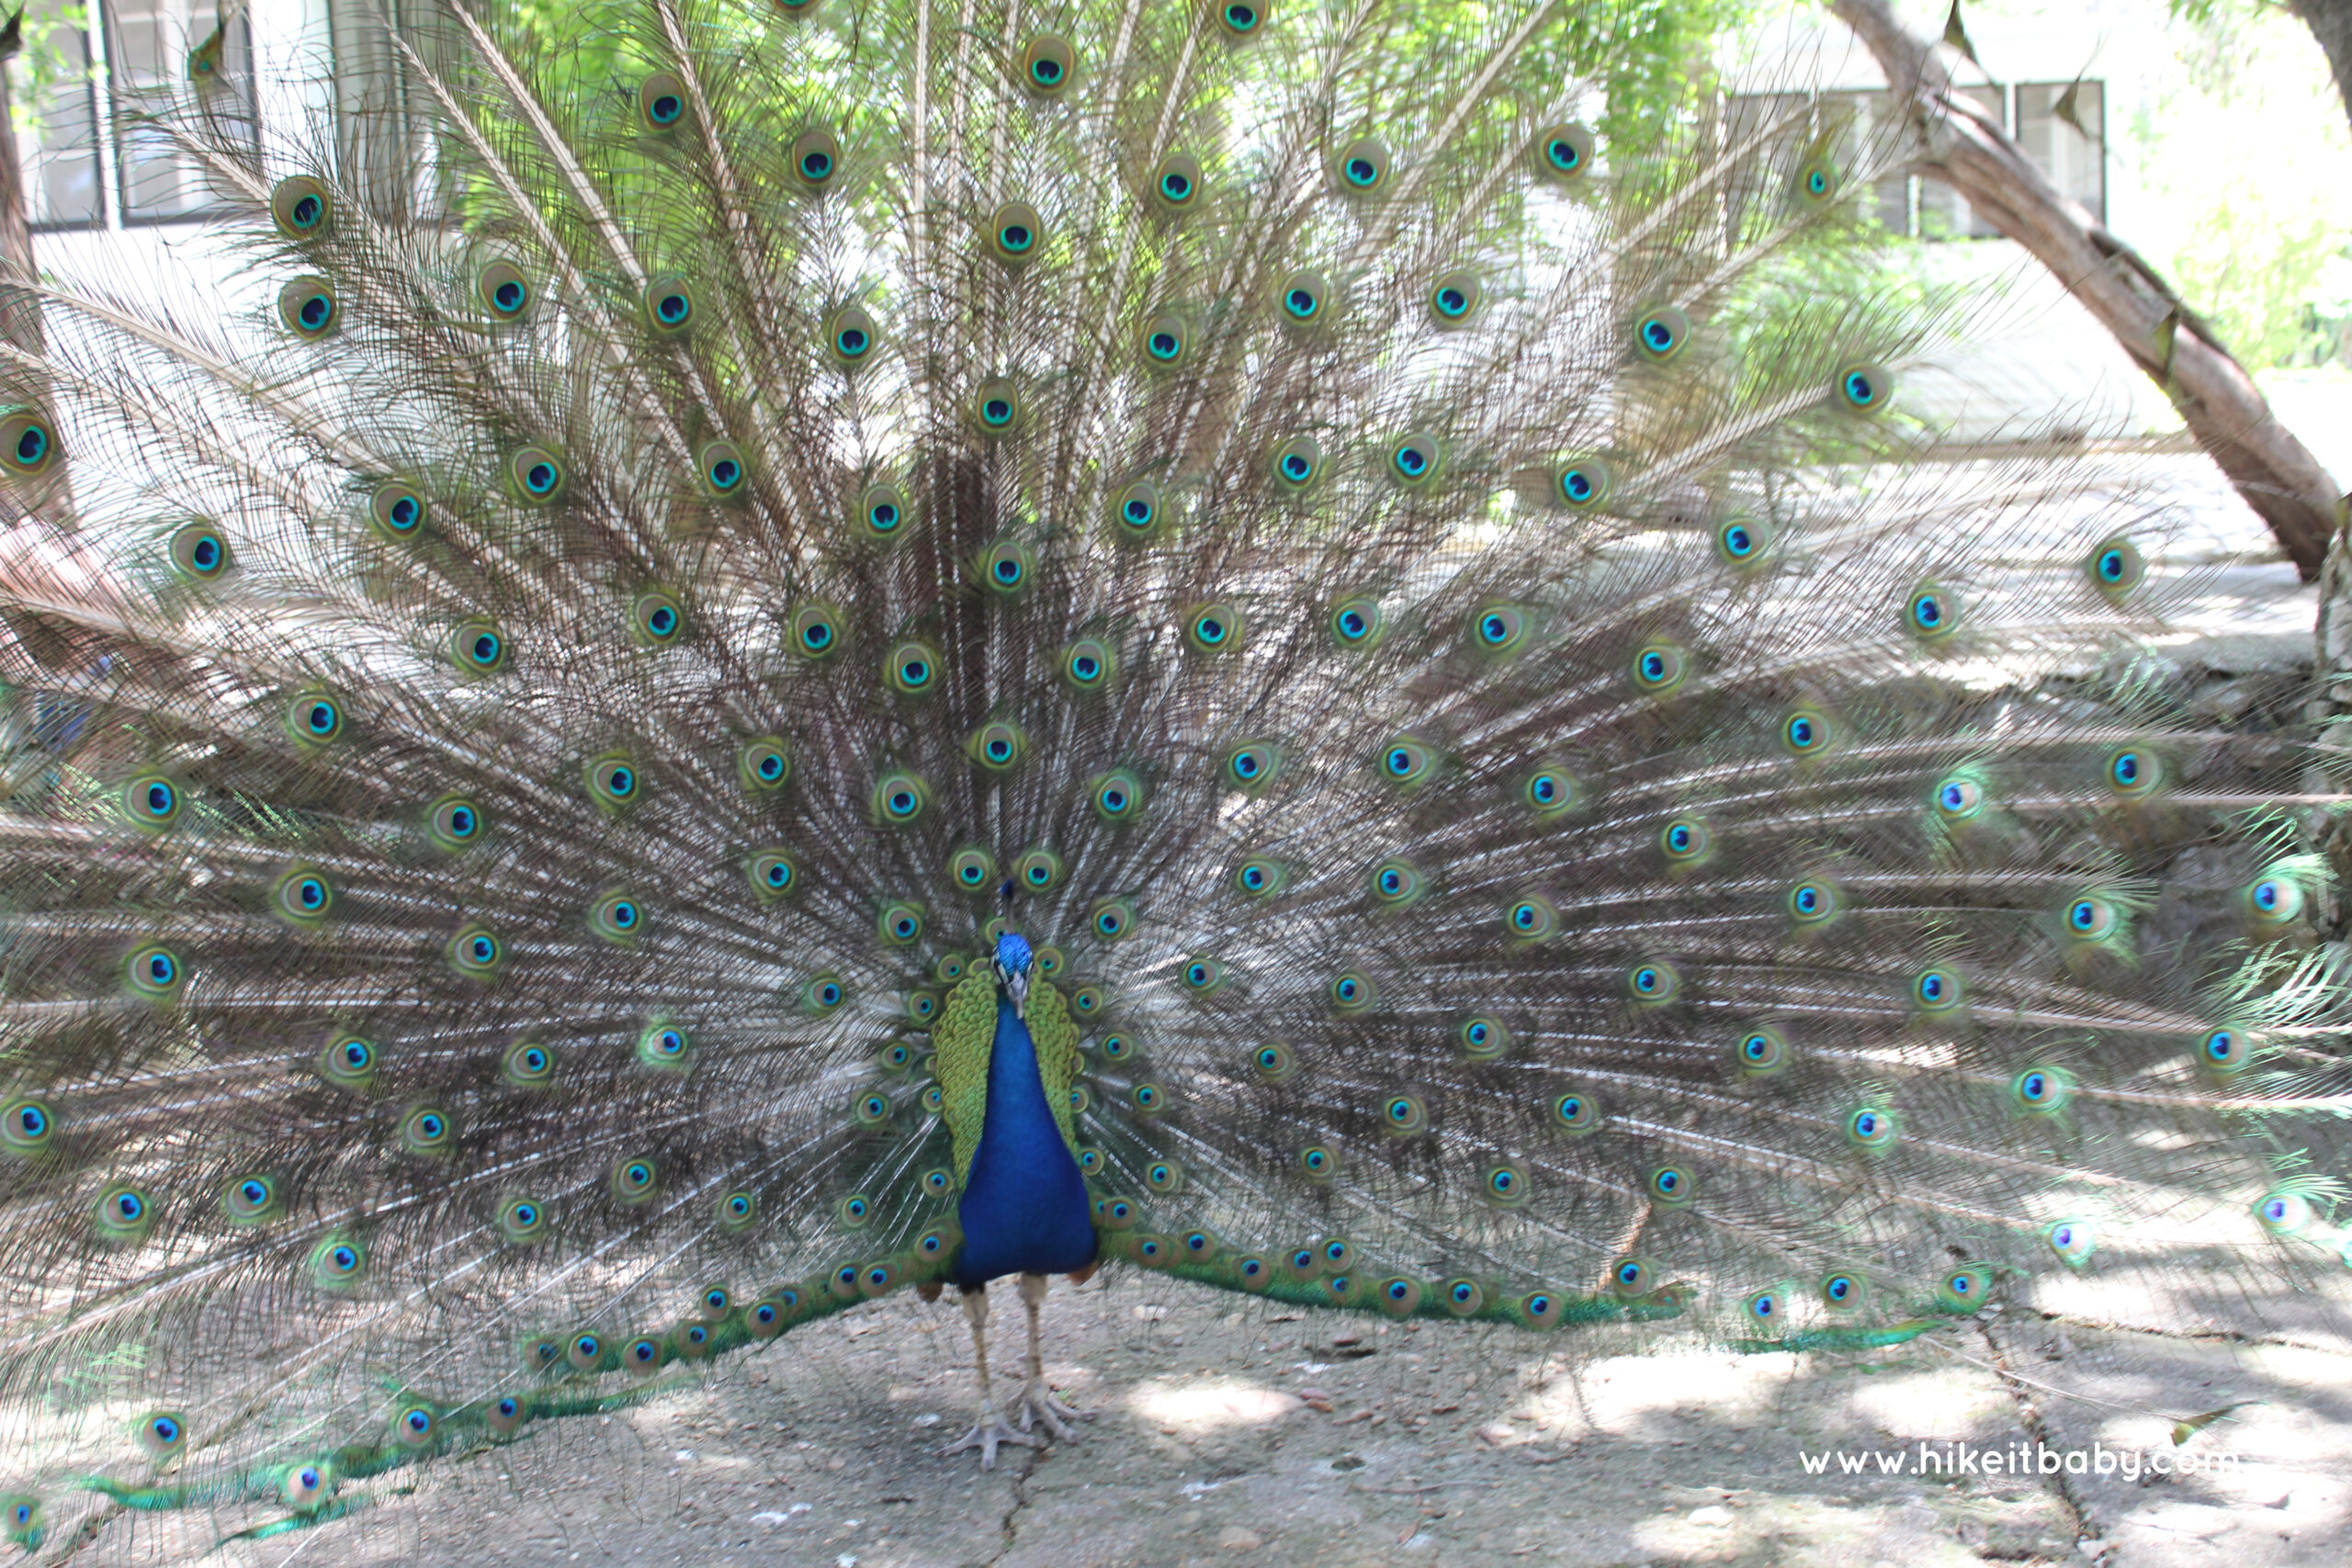 Mayfield Park Peacock